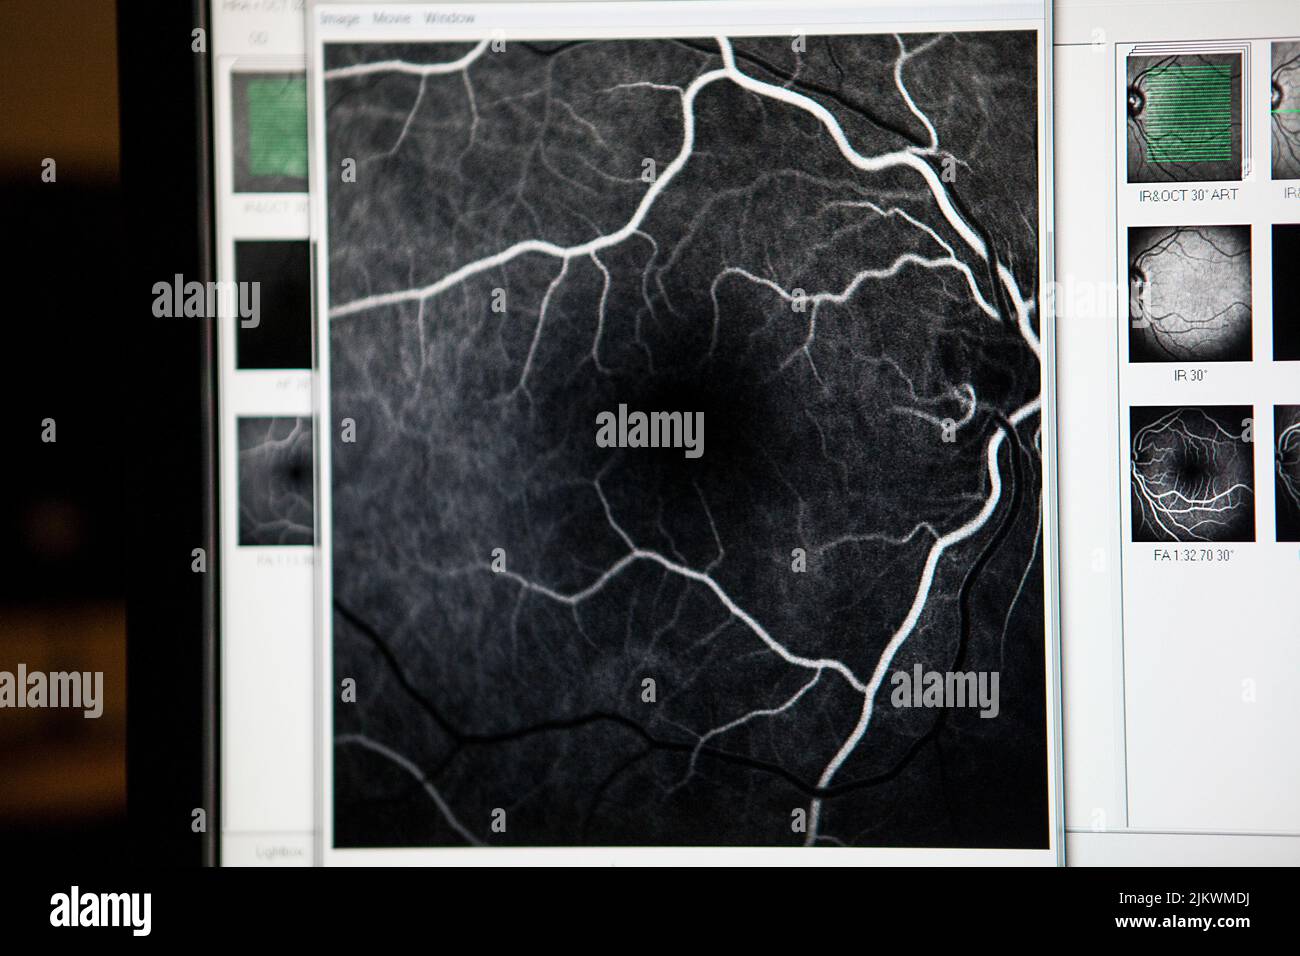 Angiofluorography of a patient at risk of glaucoma. Stock Photo